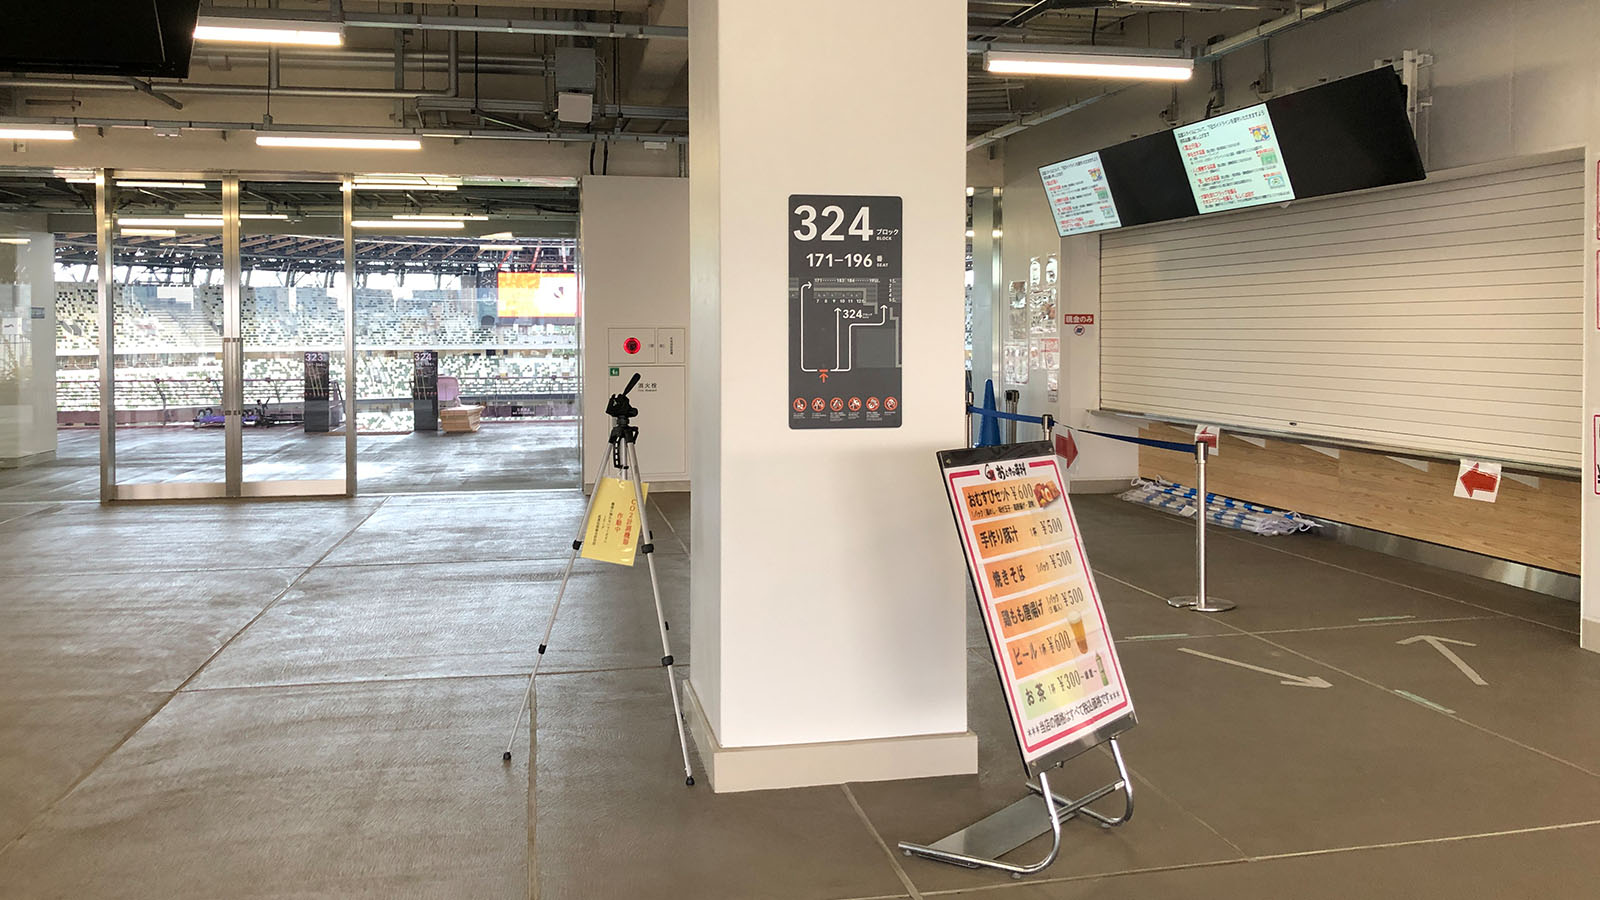 Carbon dioxide monitors at the concourse of Japan National Stadium